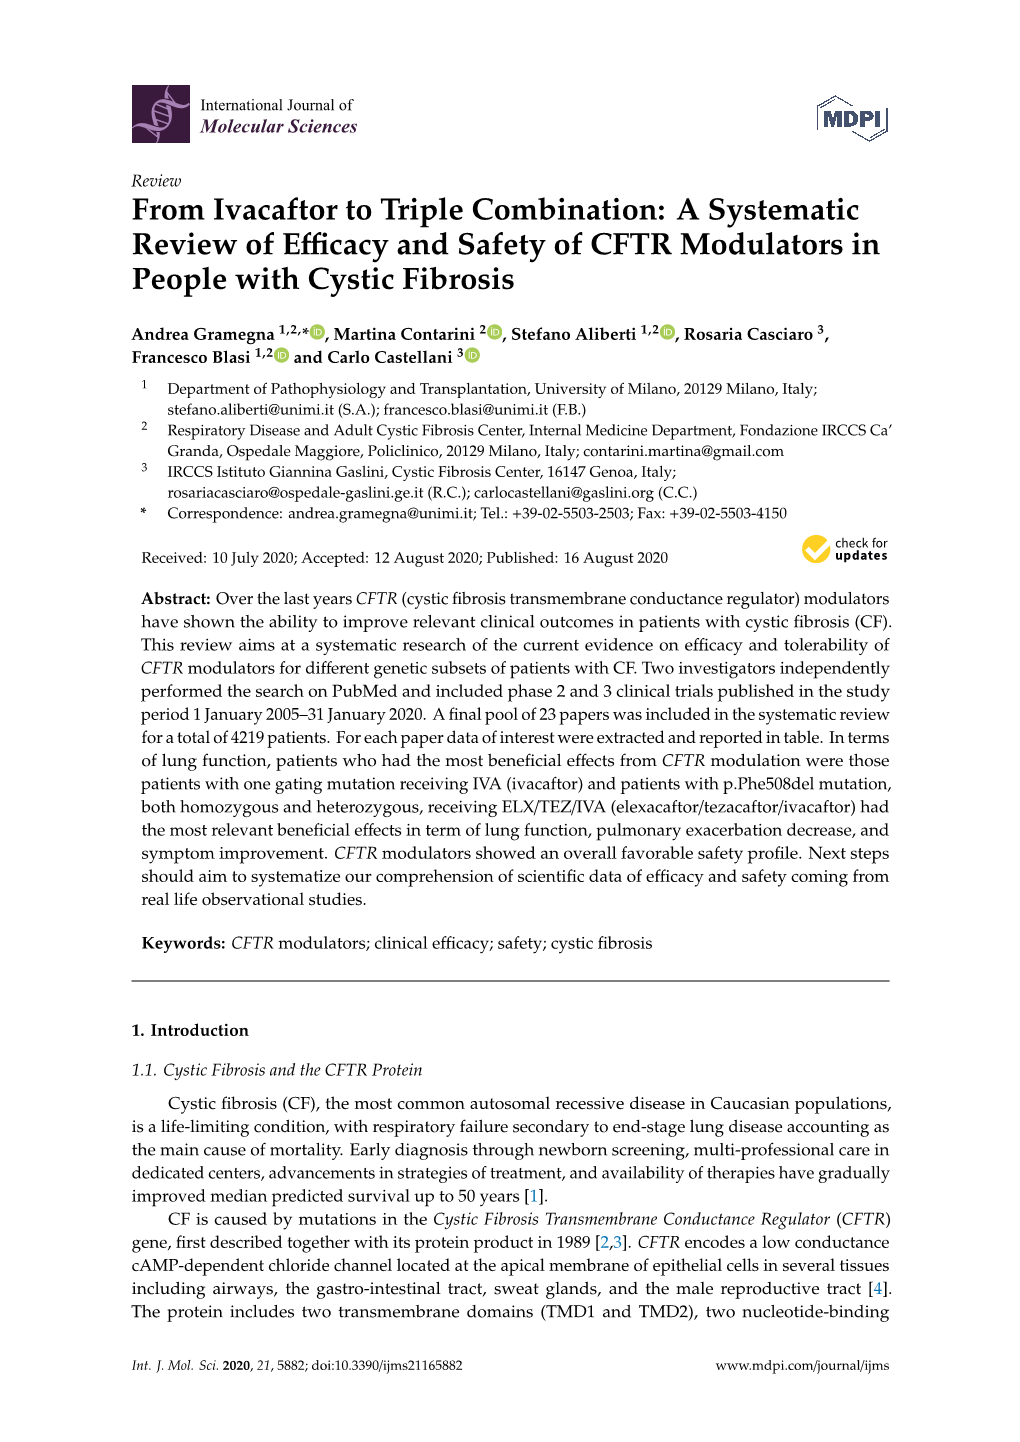 A Systematic Review of Efficacy and Safety of CFTR Modulators In